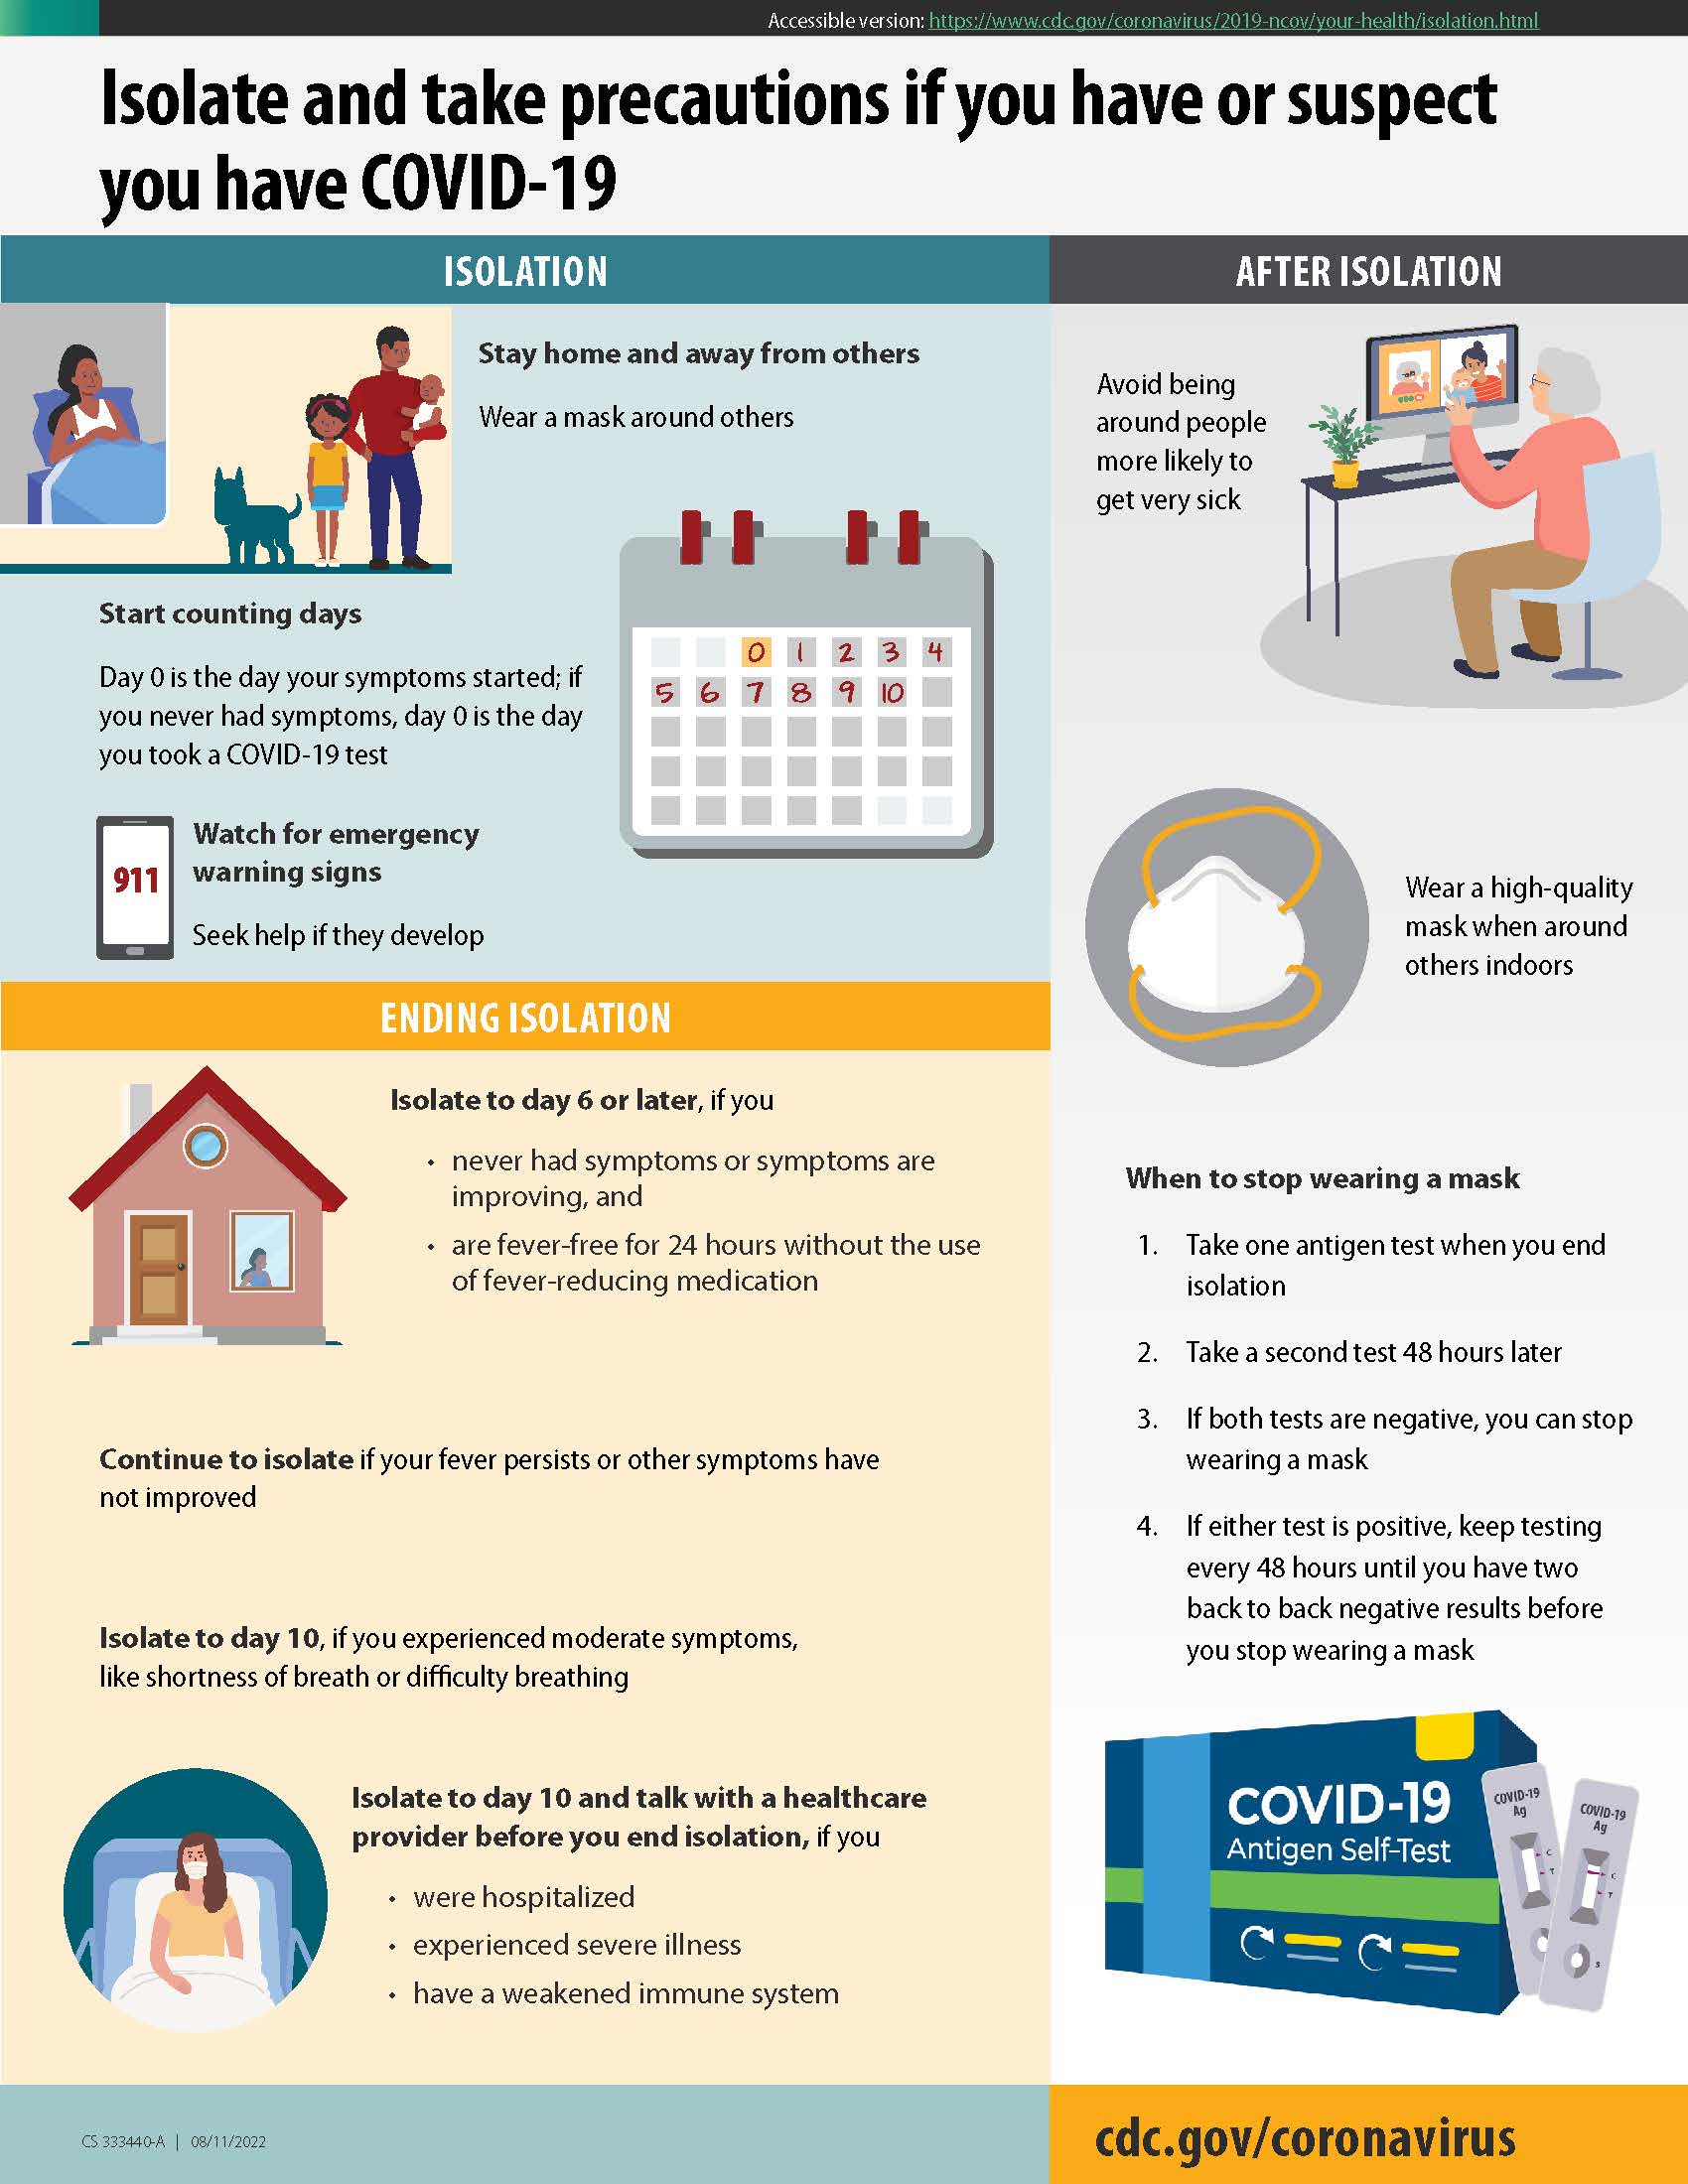 isolation-and-precautions-for-people-with-covid-19-cdc